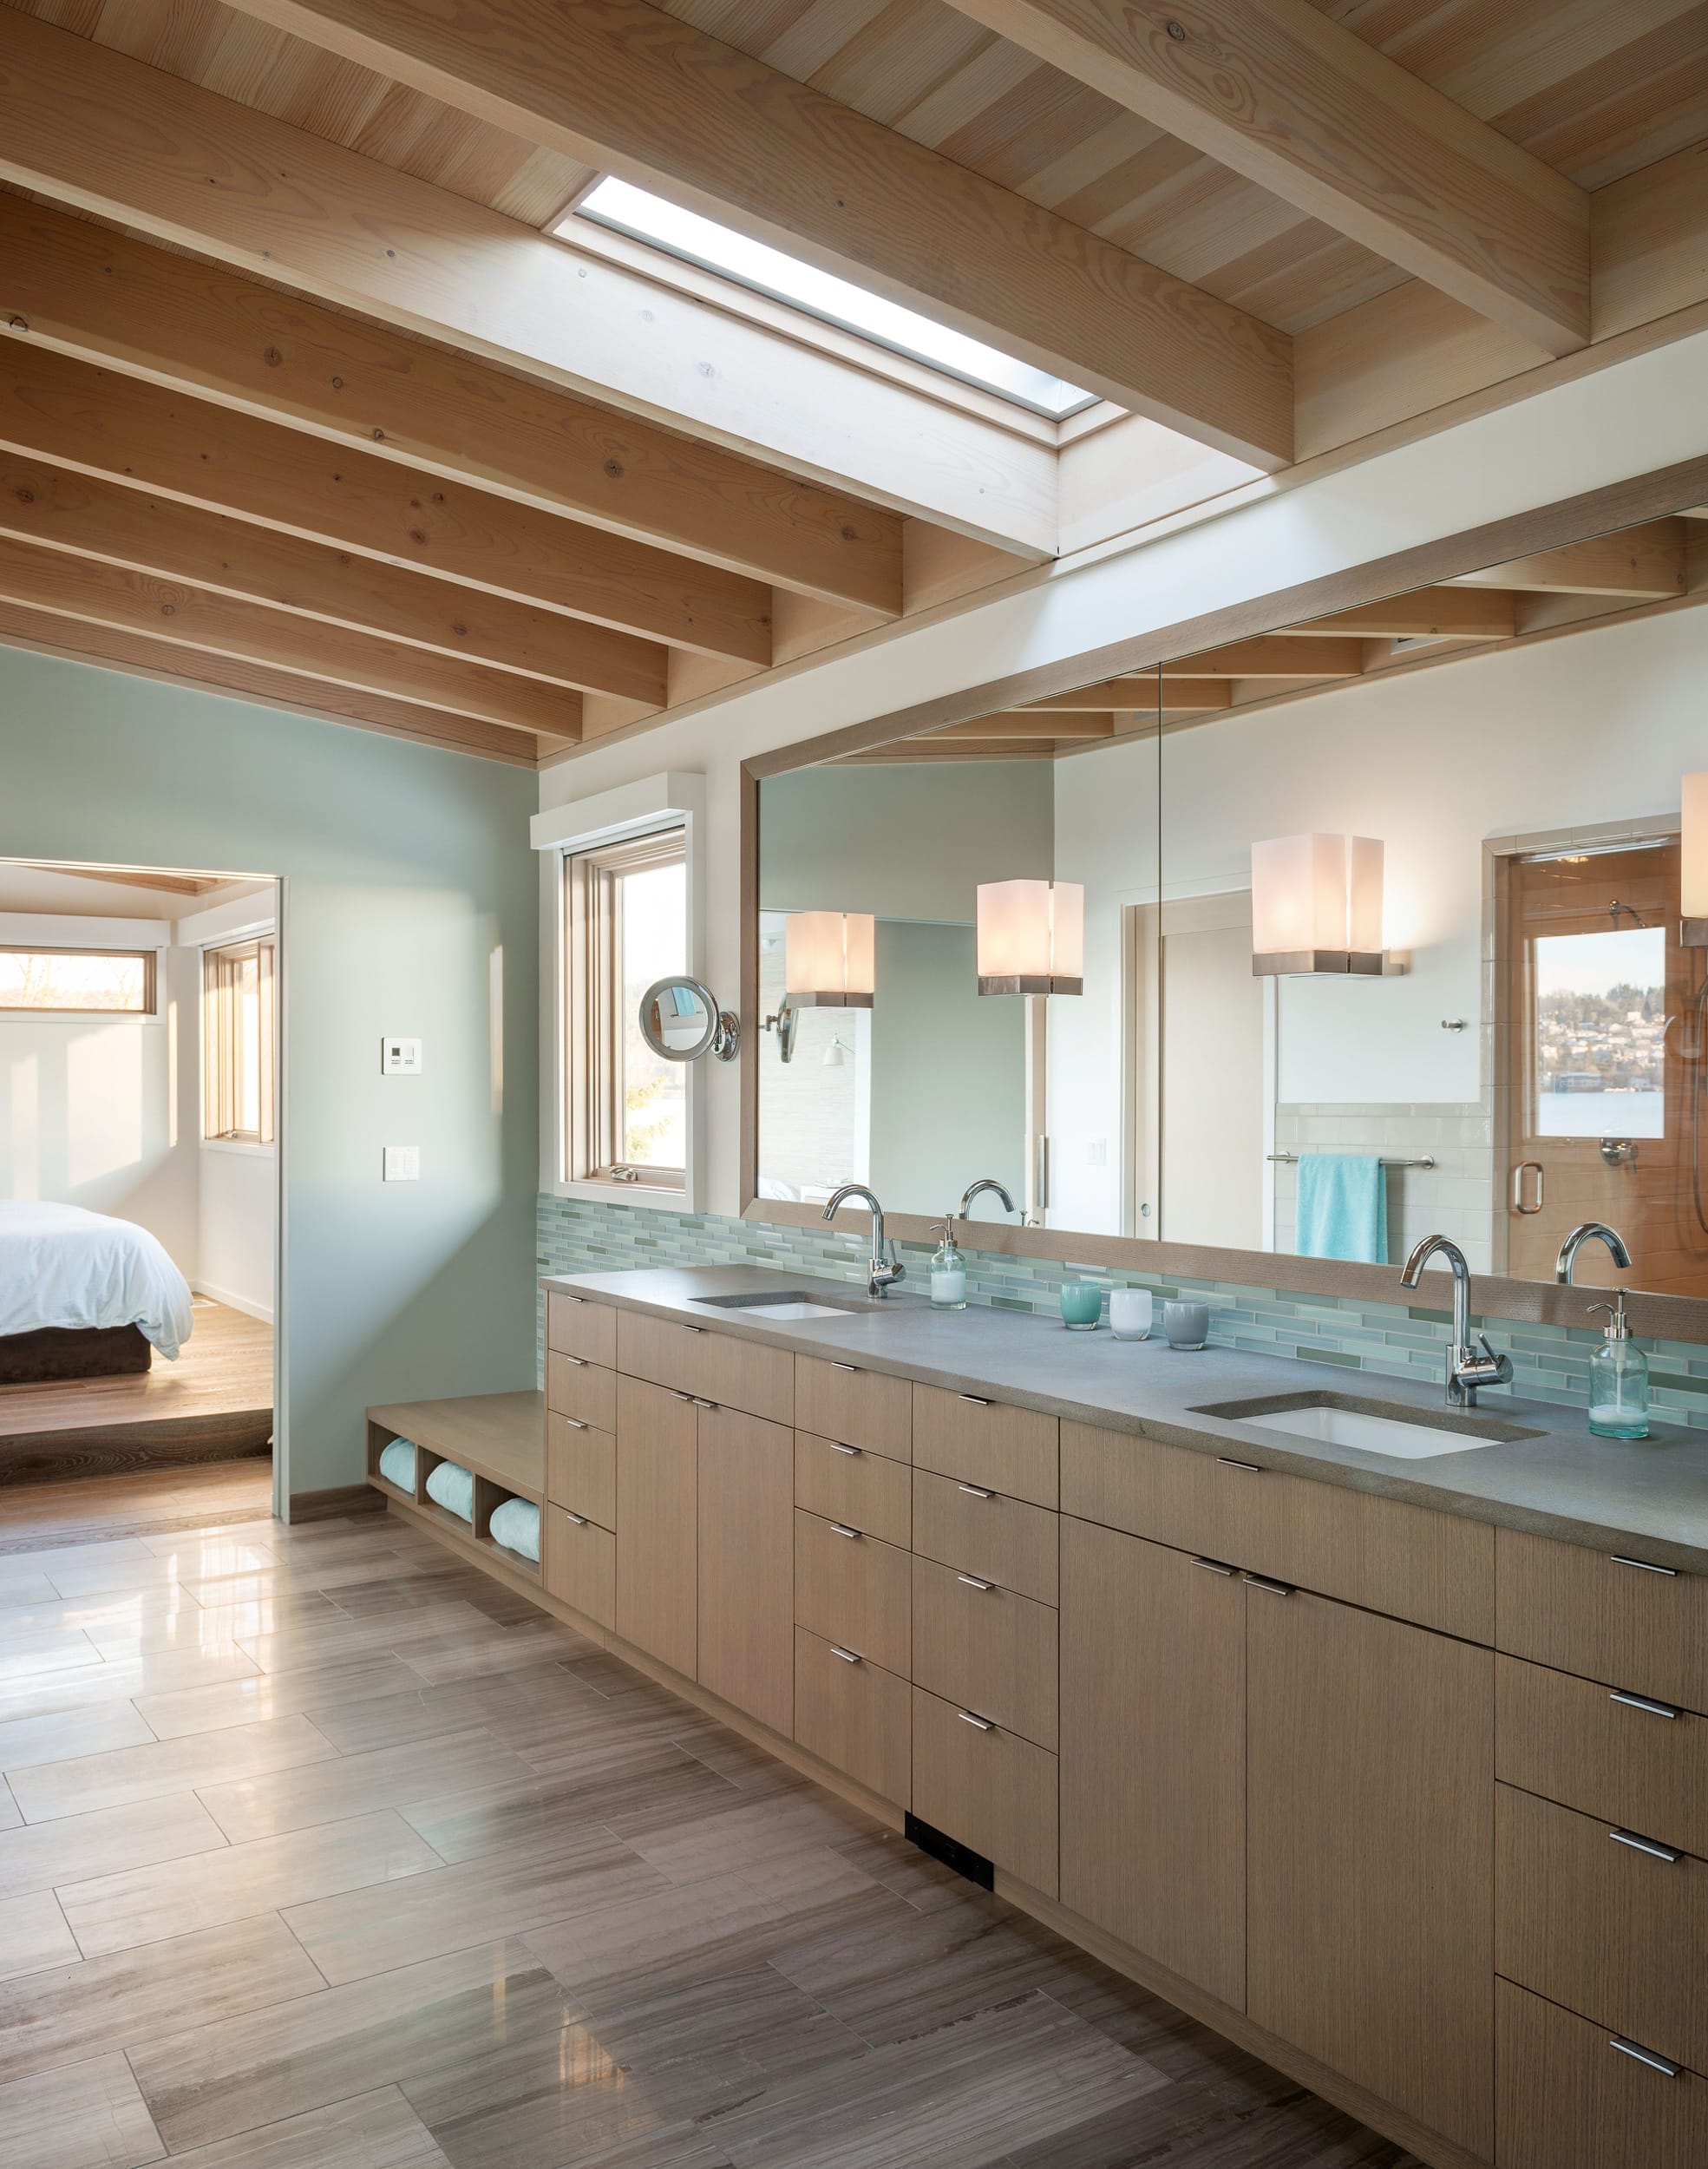 A bathroom with a skylight and wooden ceiling.